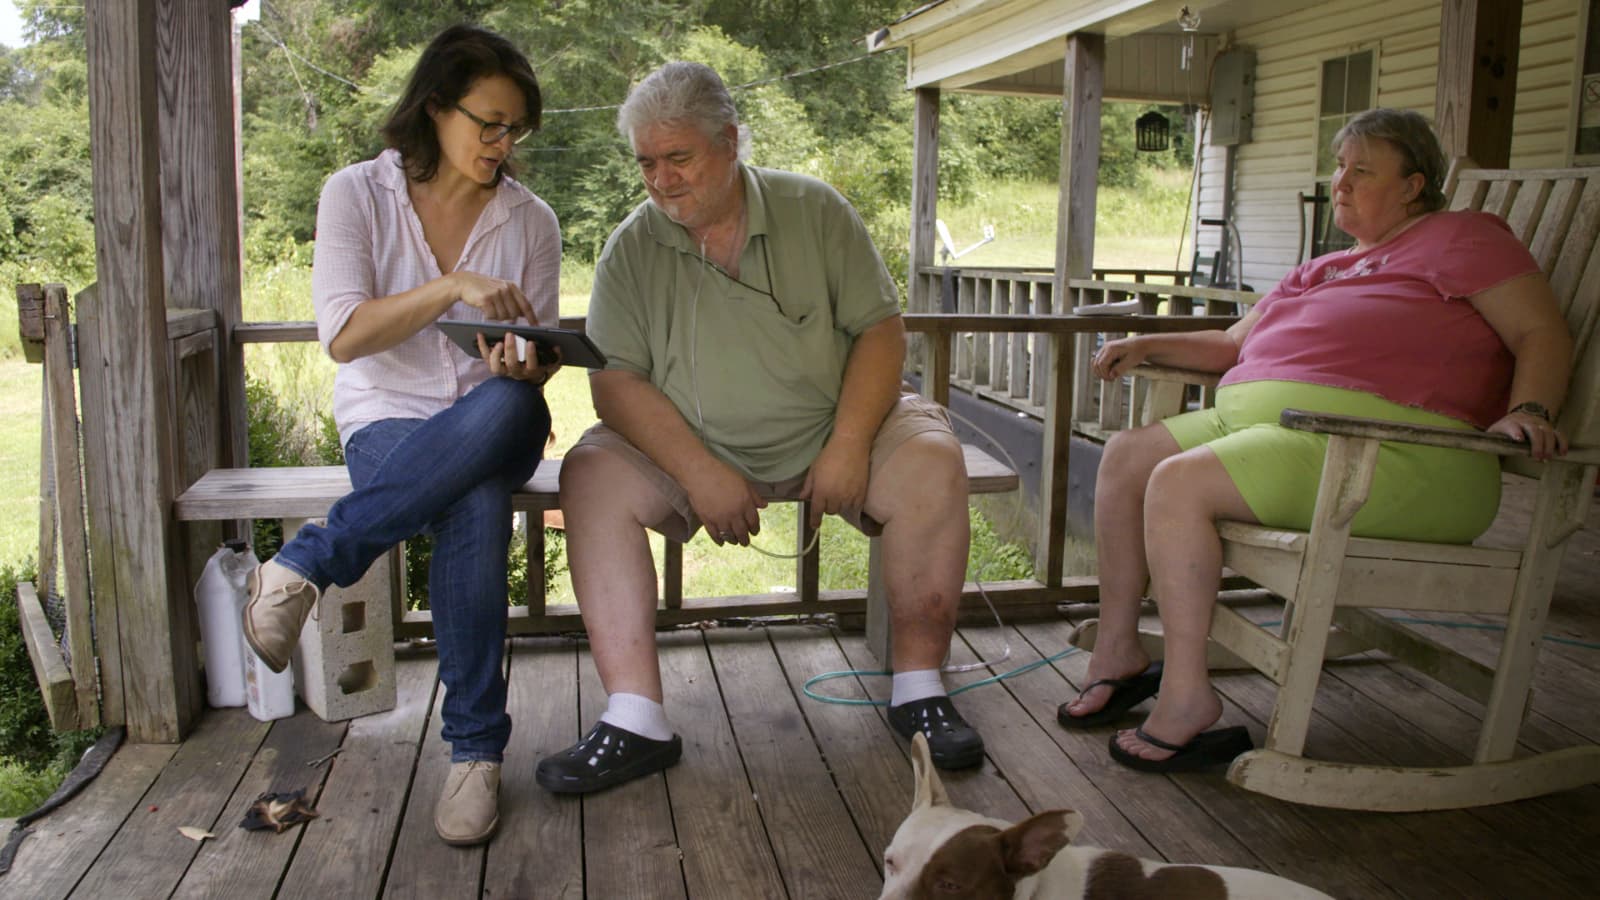 Filmmaker Jennifer Crandall (left) sits with Billy Wayne Corkerin and his wife Lucy Corkerin on the porch of their home in Fayette, Ala. The couple read verse 43 of the Walt Whitman poem "Song of Myself" for the project "Whitman, Alabama." (Courtesy Pierre Kattar)